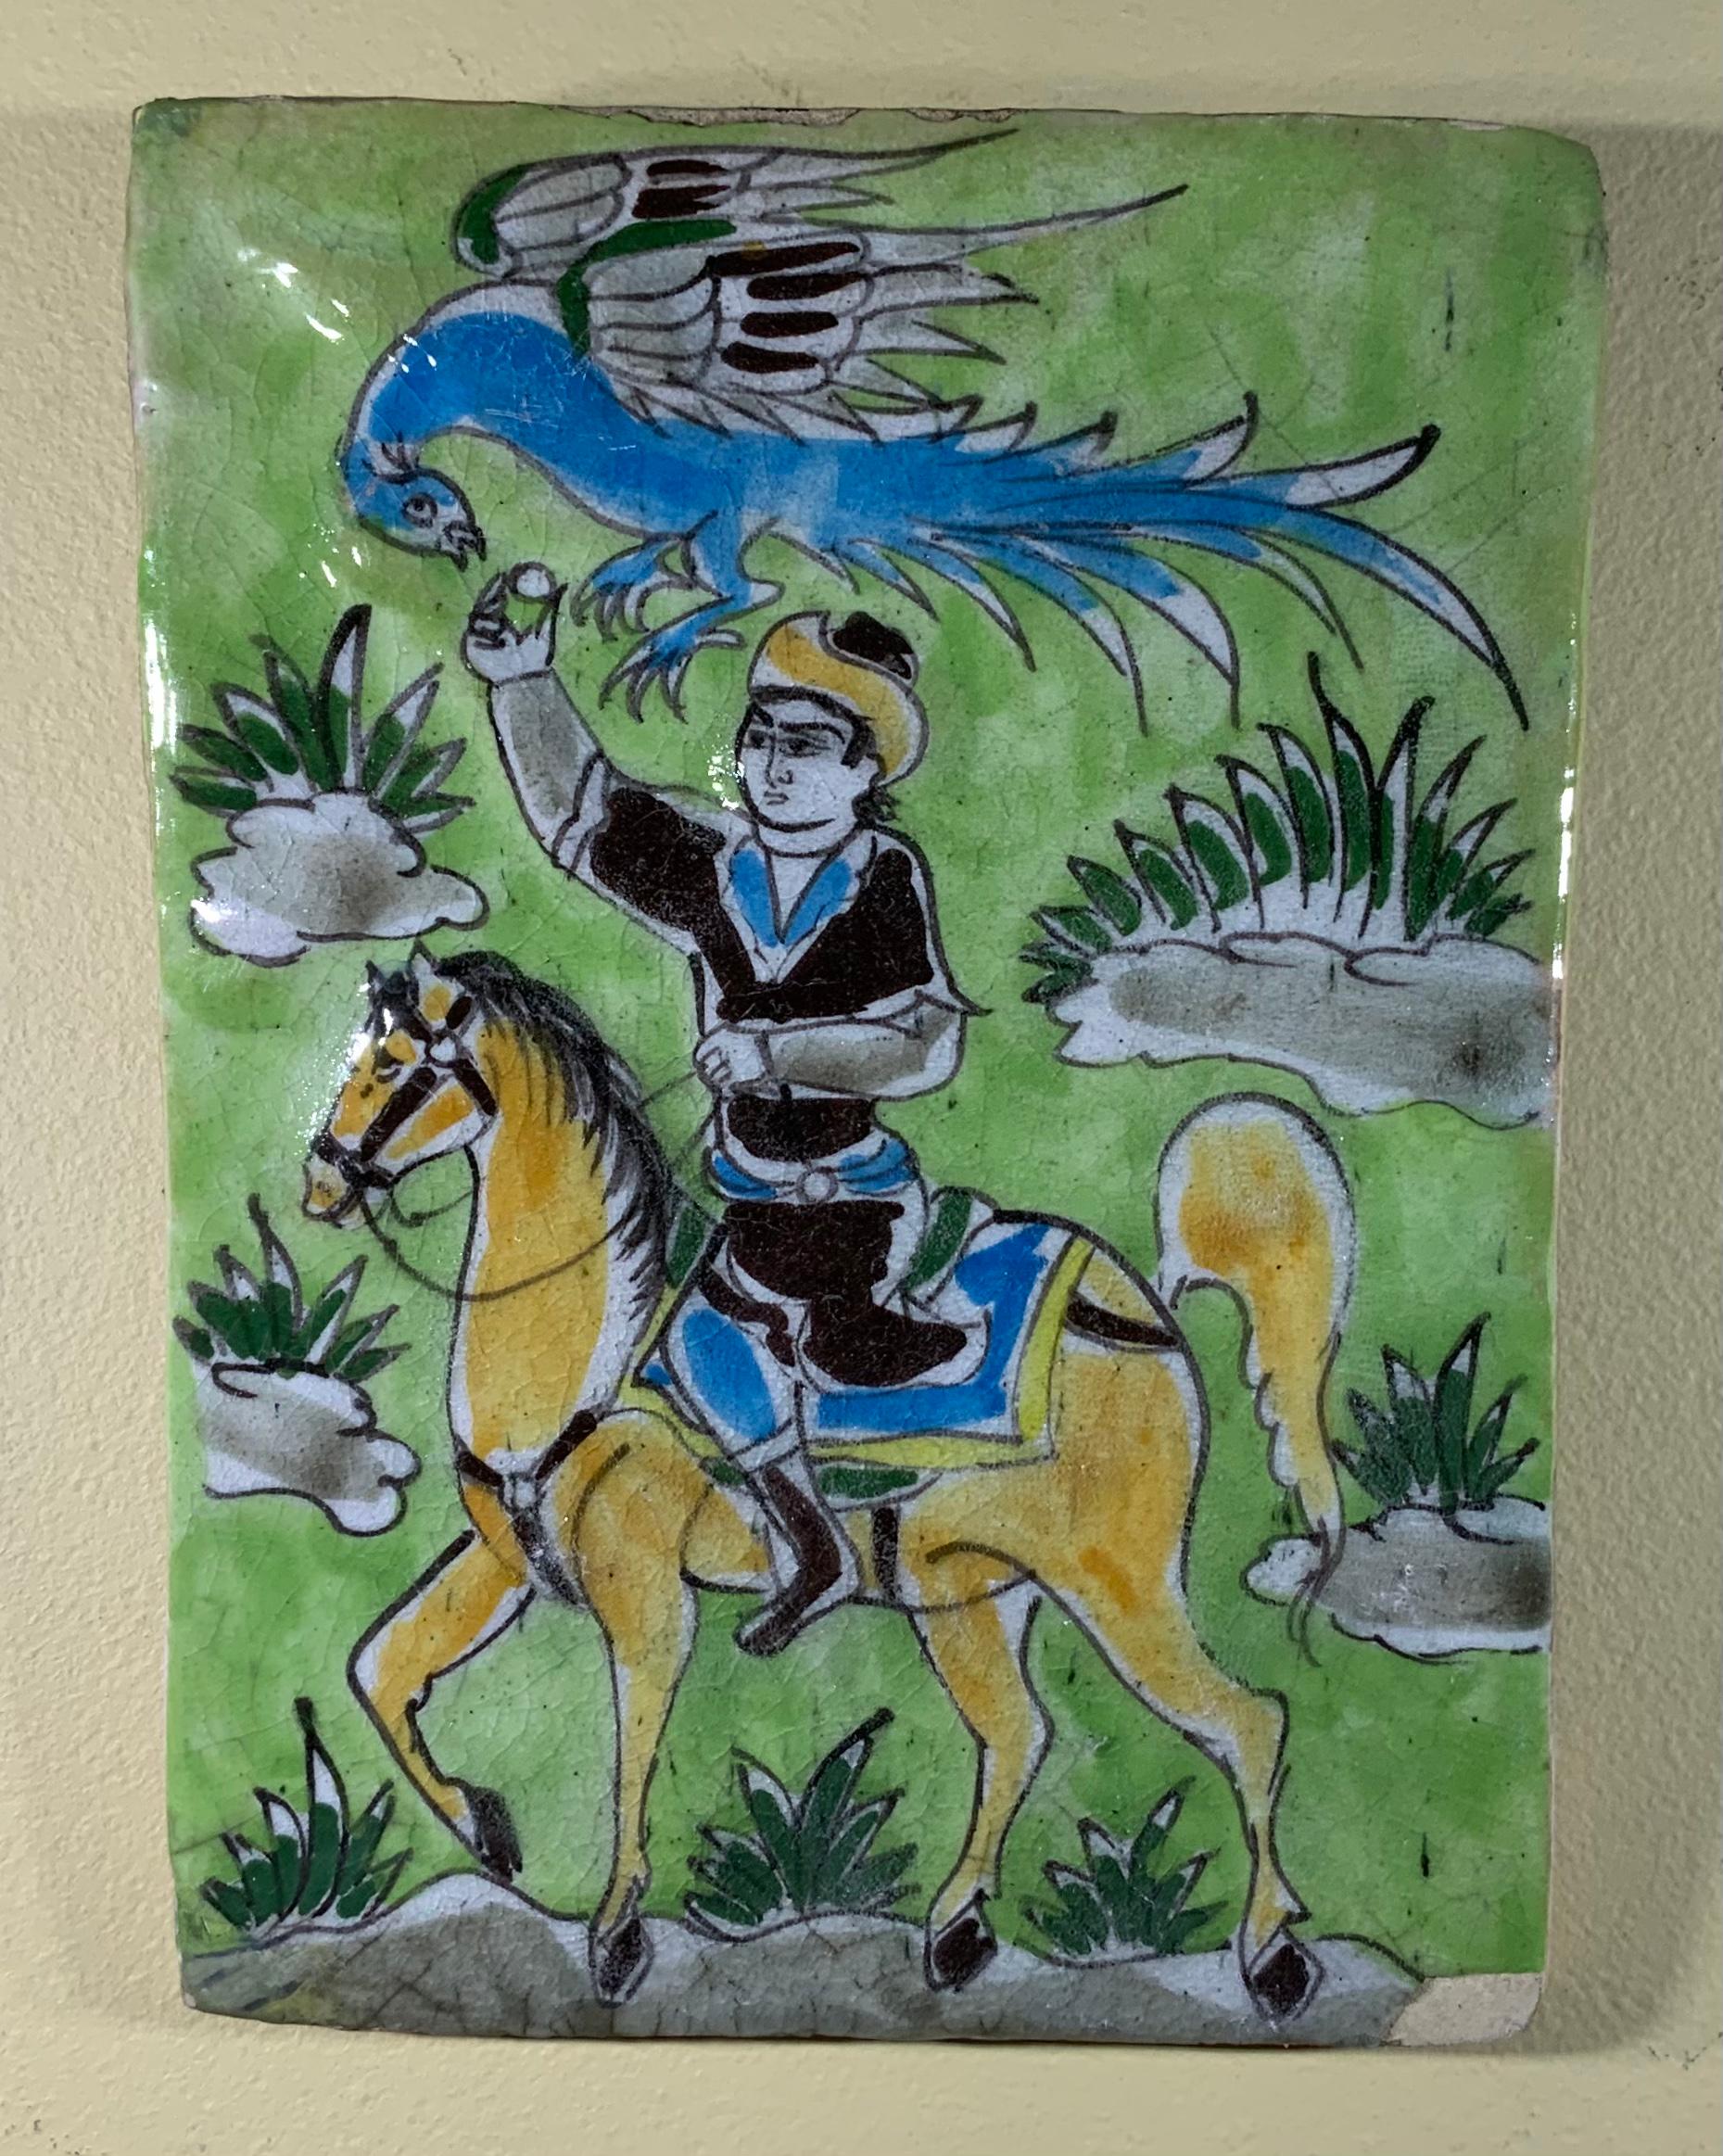 Beautiful hand made and painted, glazed tile, with a Man on a horse holding bird probably falcon.
The tile can hang on the wall.